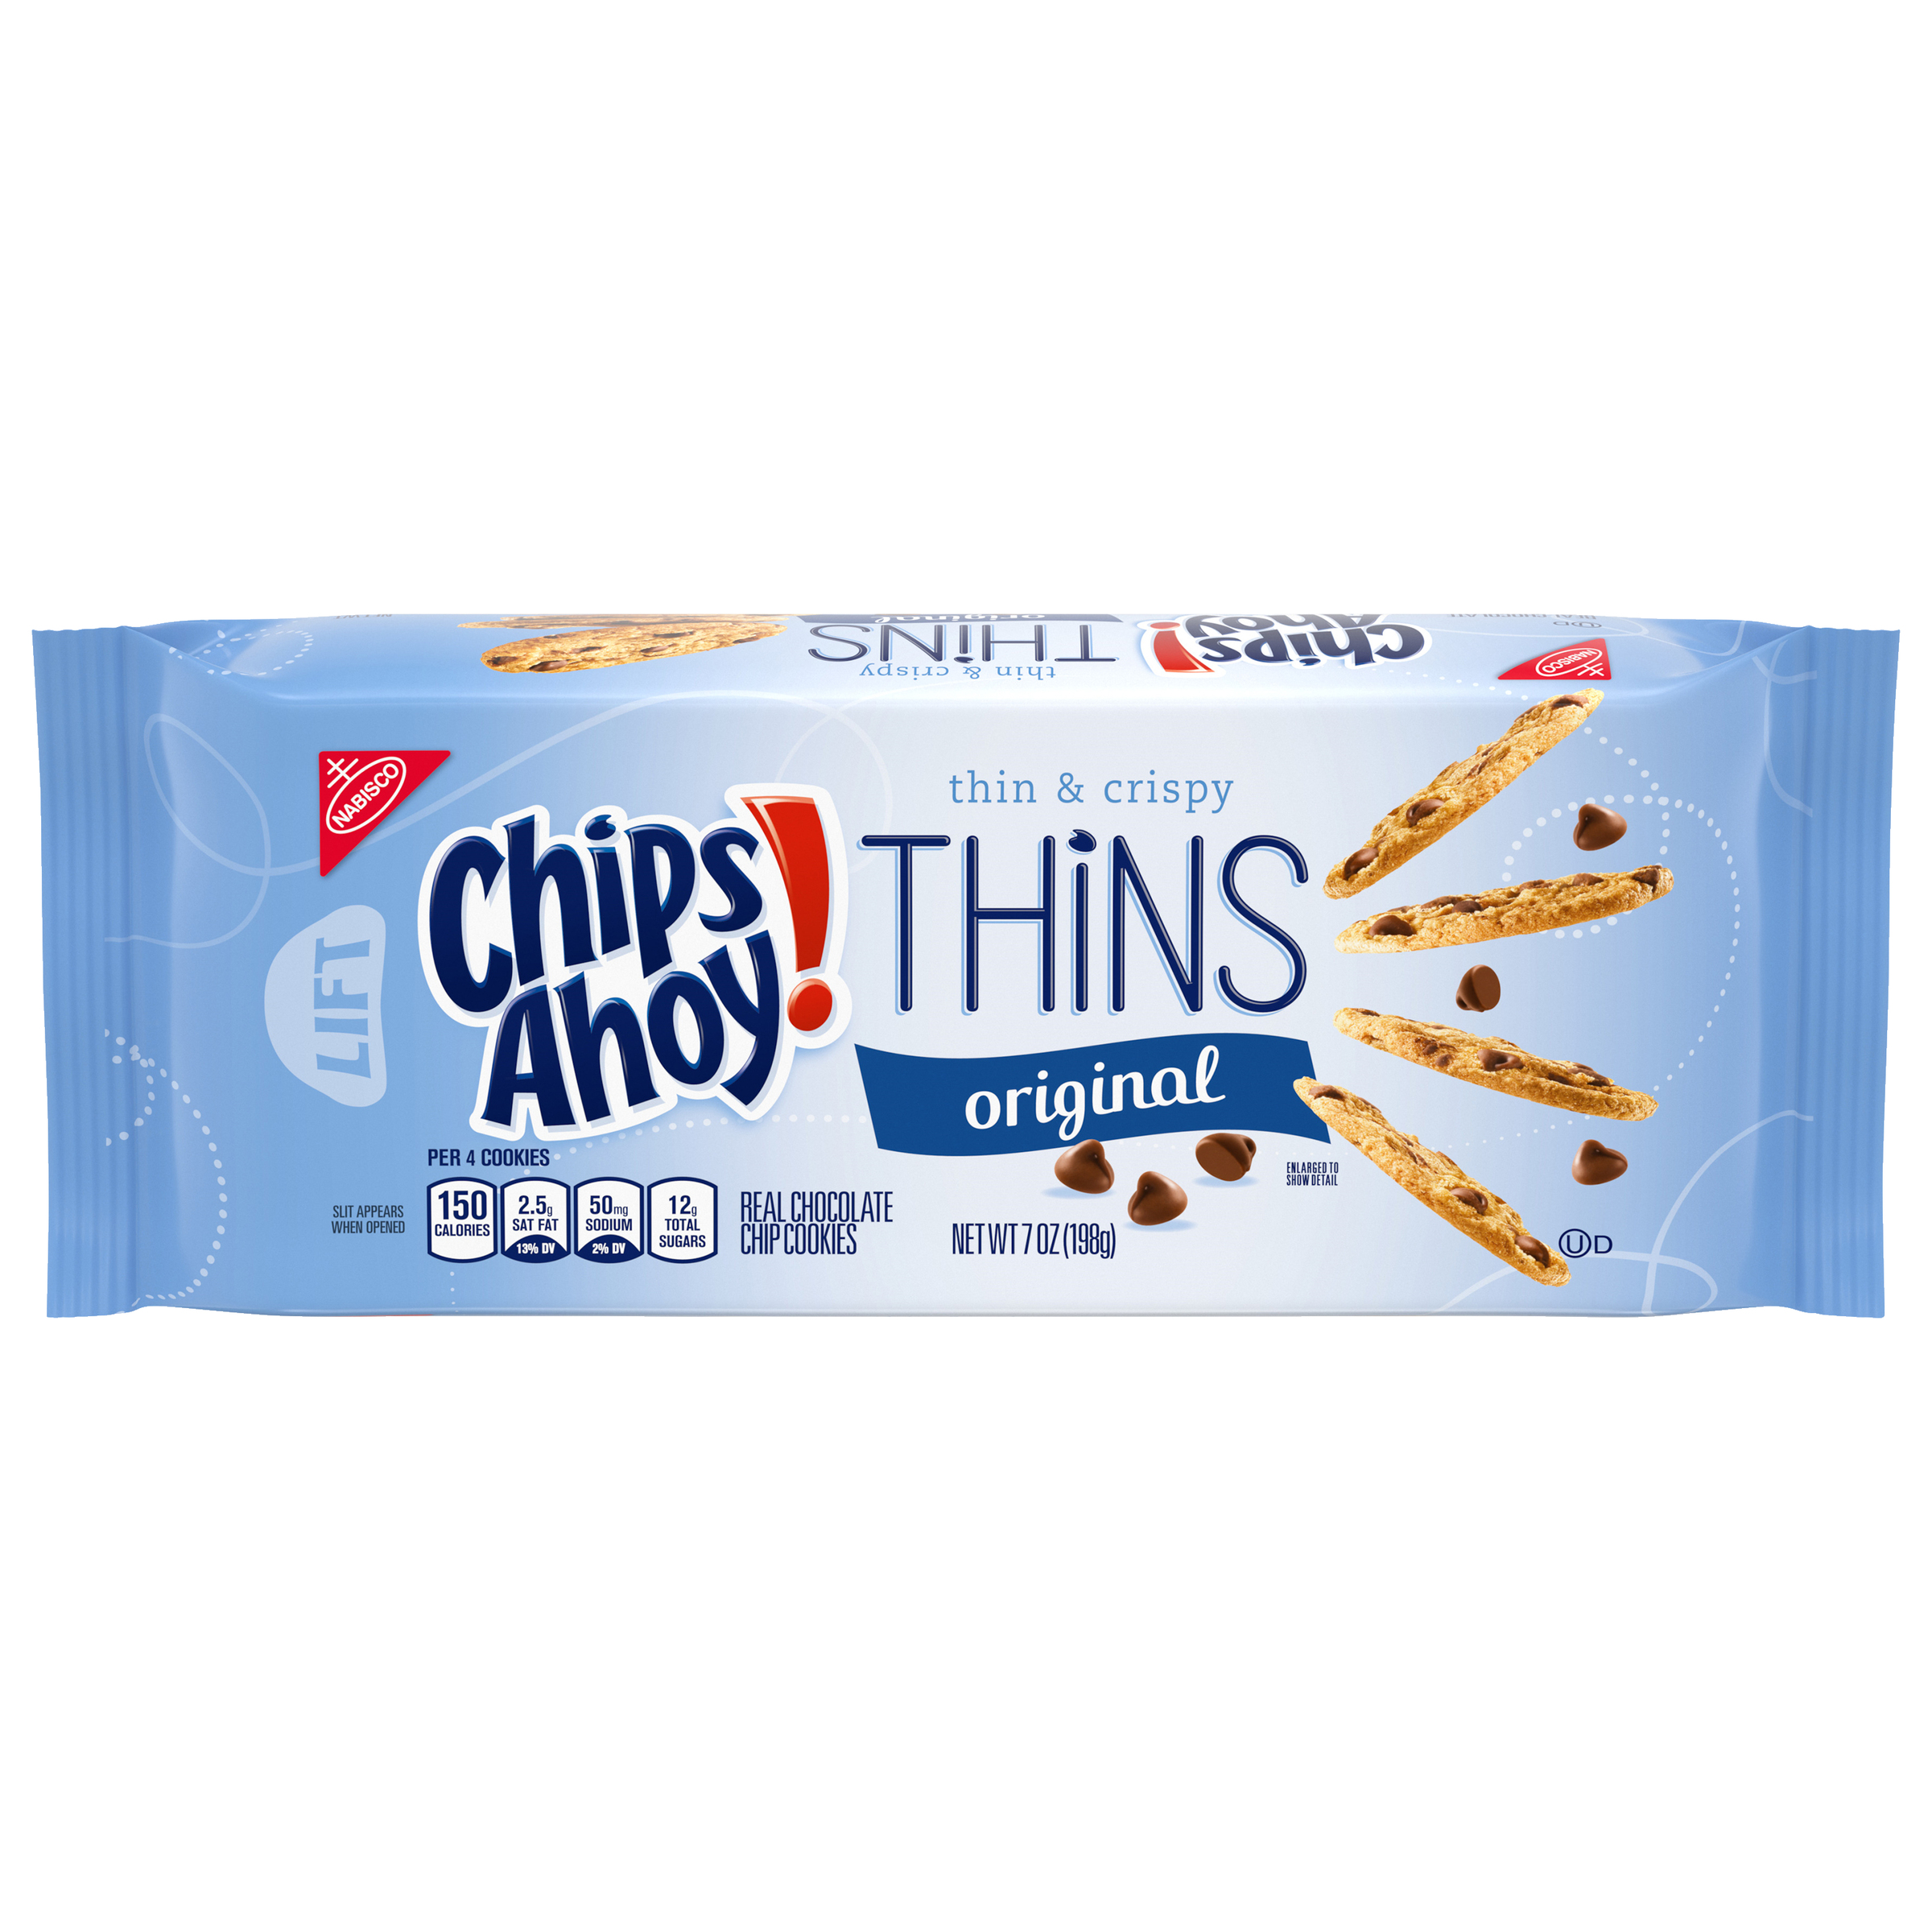 CHIPS AHOY! Thins Original Chocolate Chip Cookies, 7 oz-0